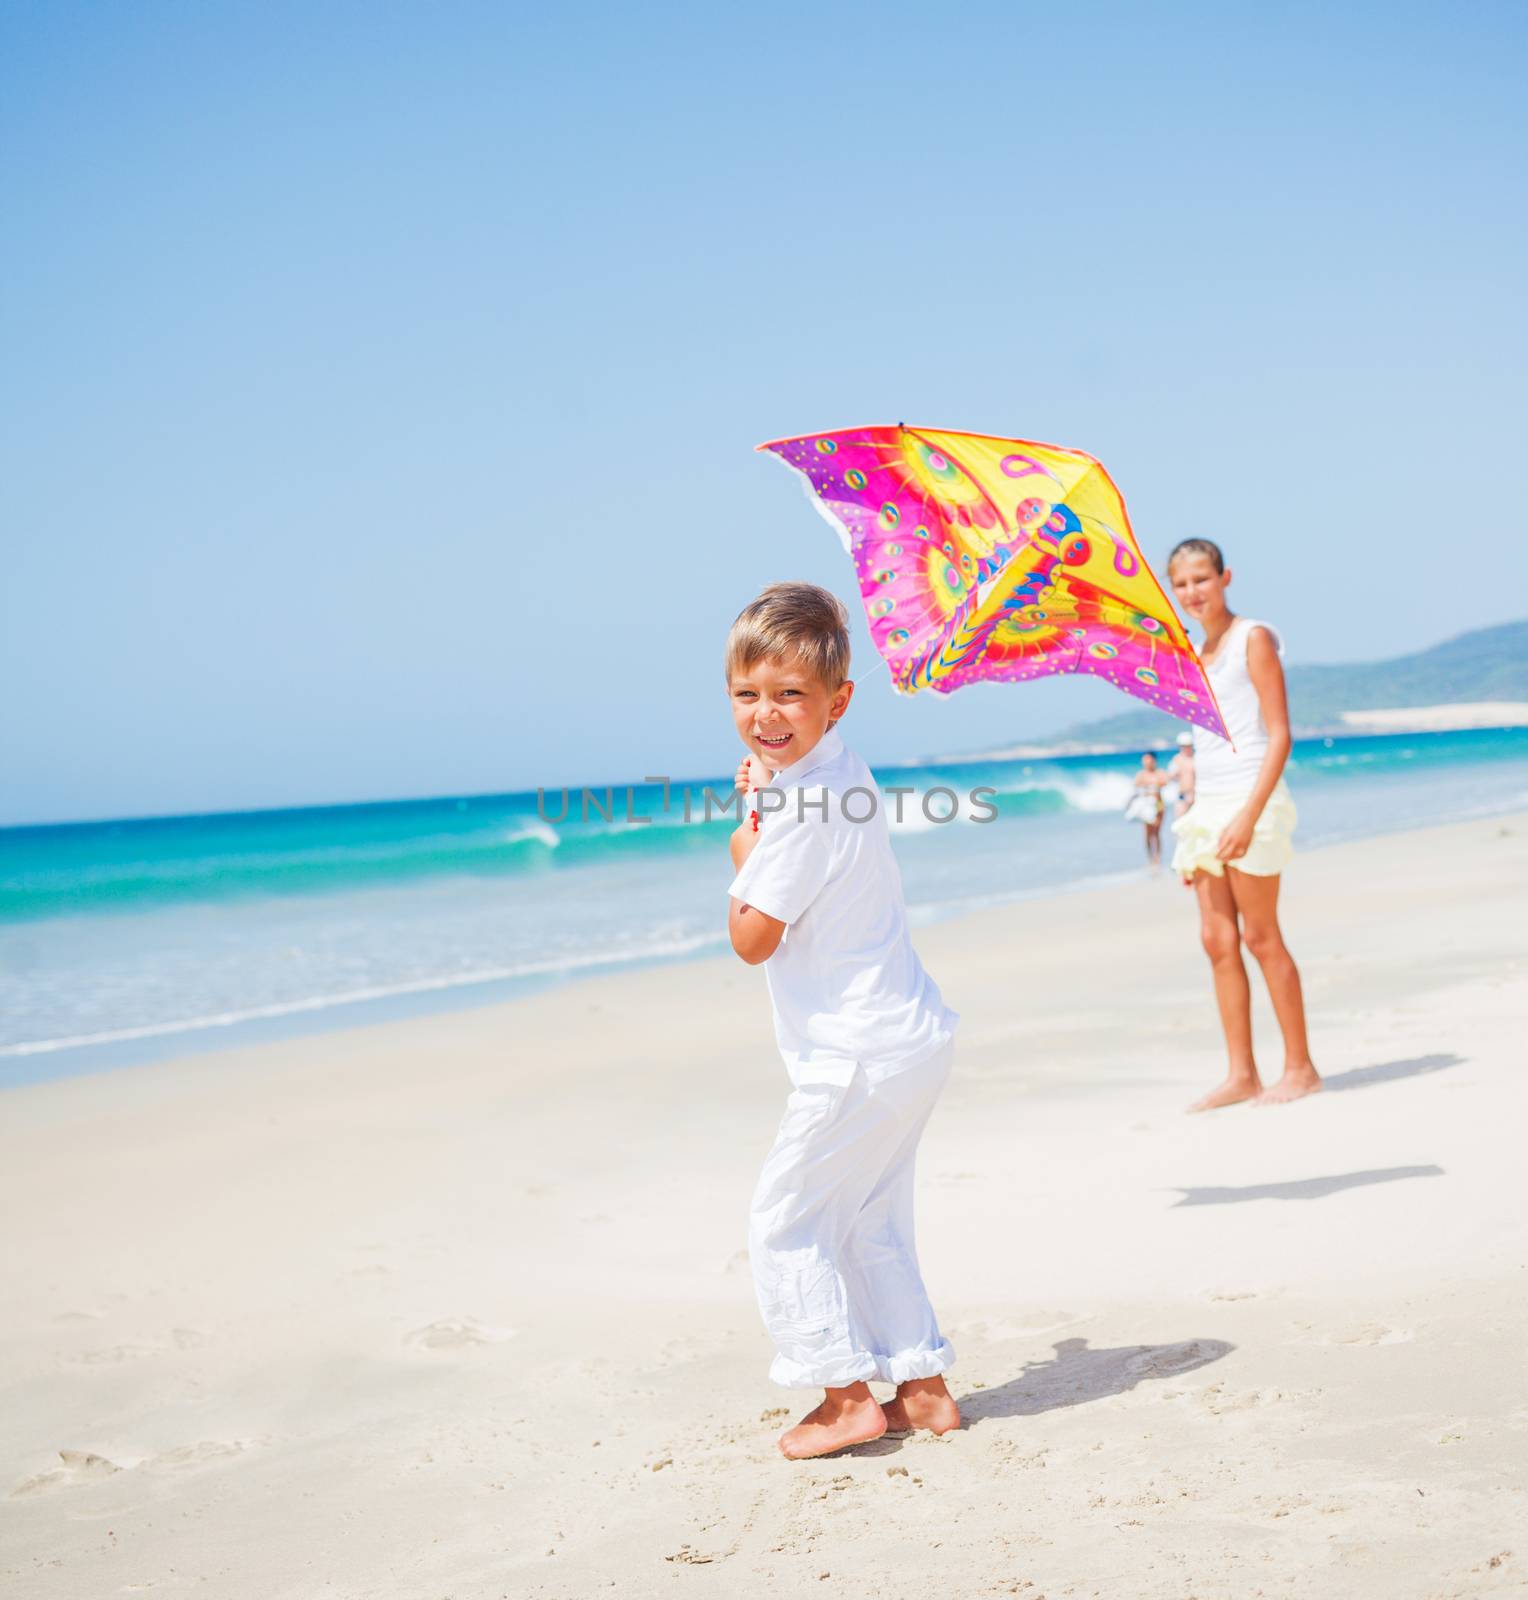 Summer vacation - Cute boy and girl flying kite beach outdoor.